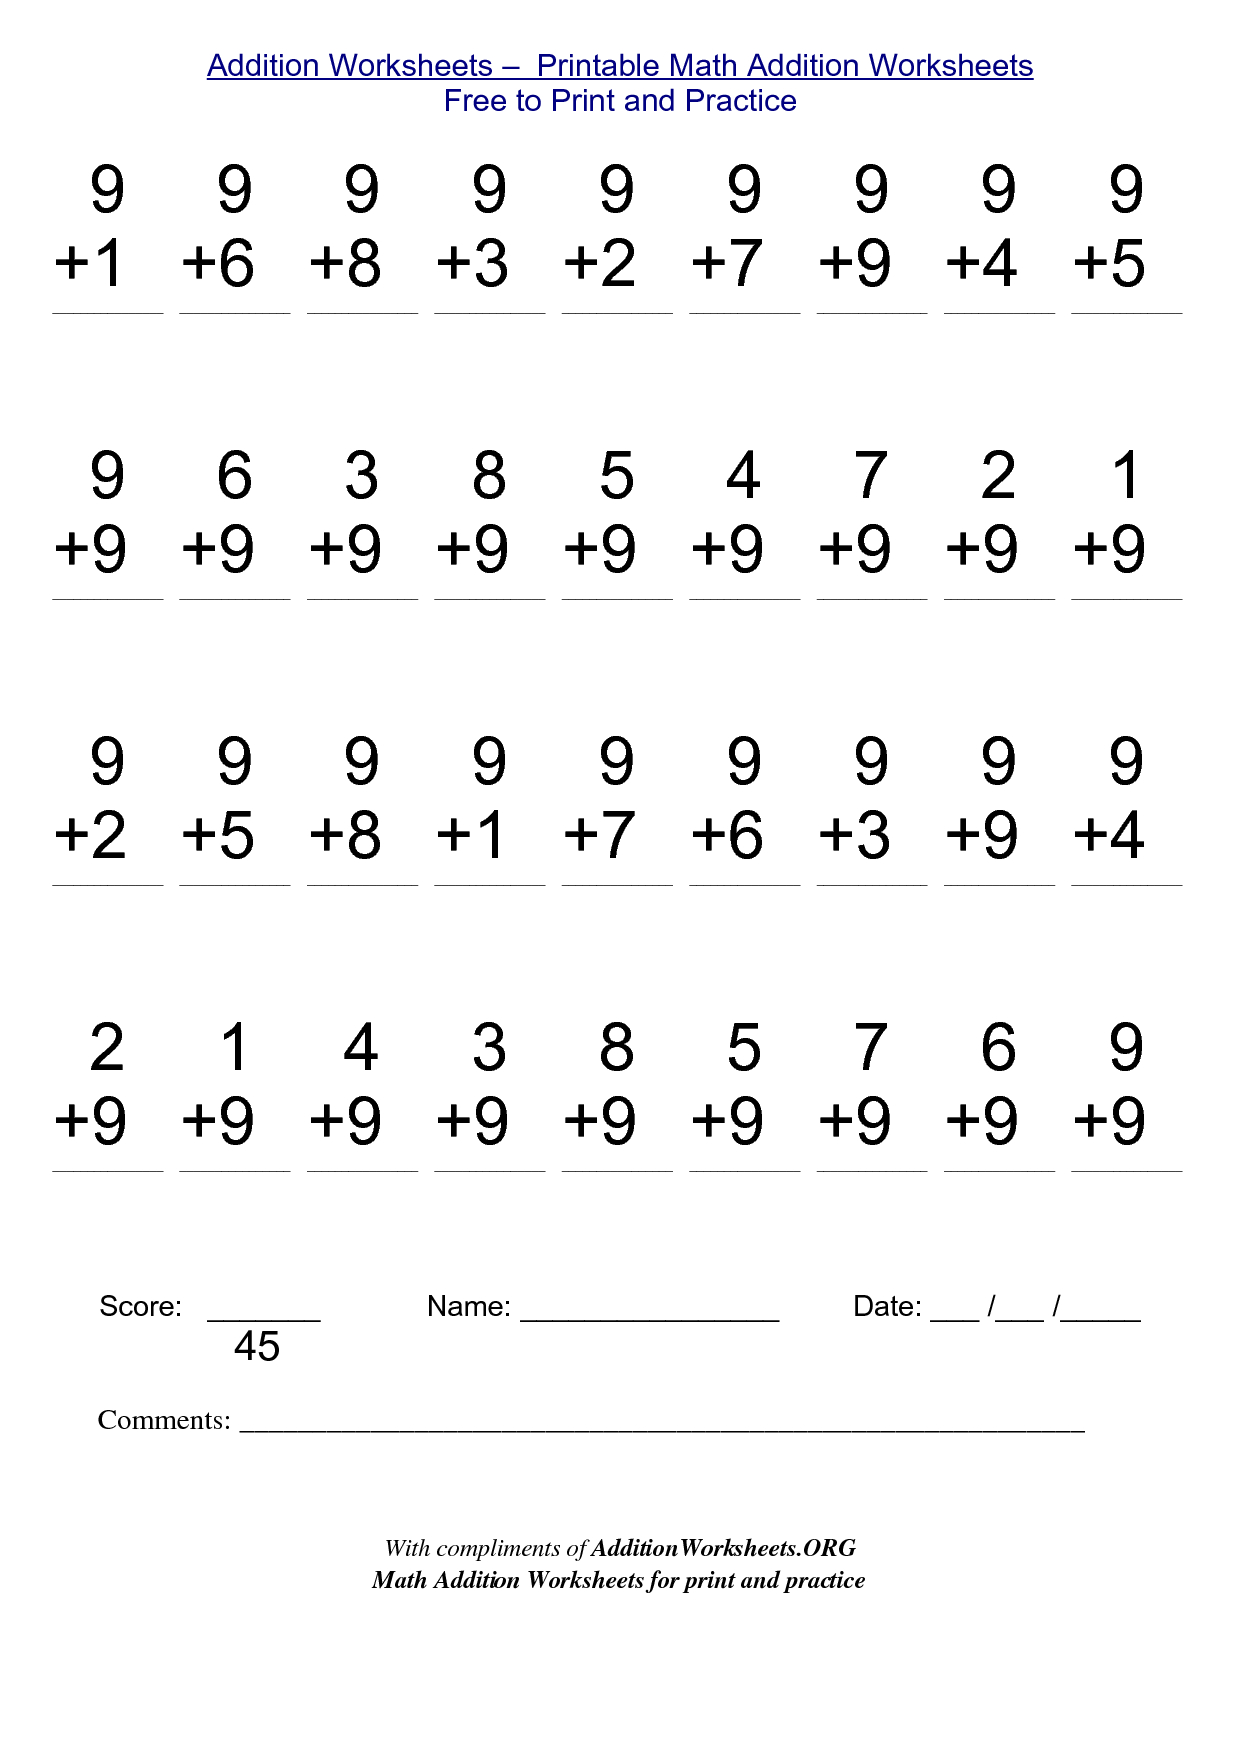 Math Worksheets For Free To Print - Alot | Me | Math Worksheets - Free Printable Second Grade Math